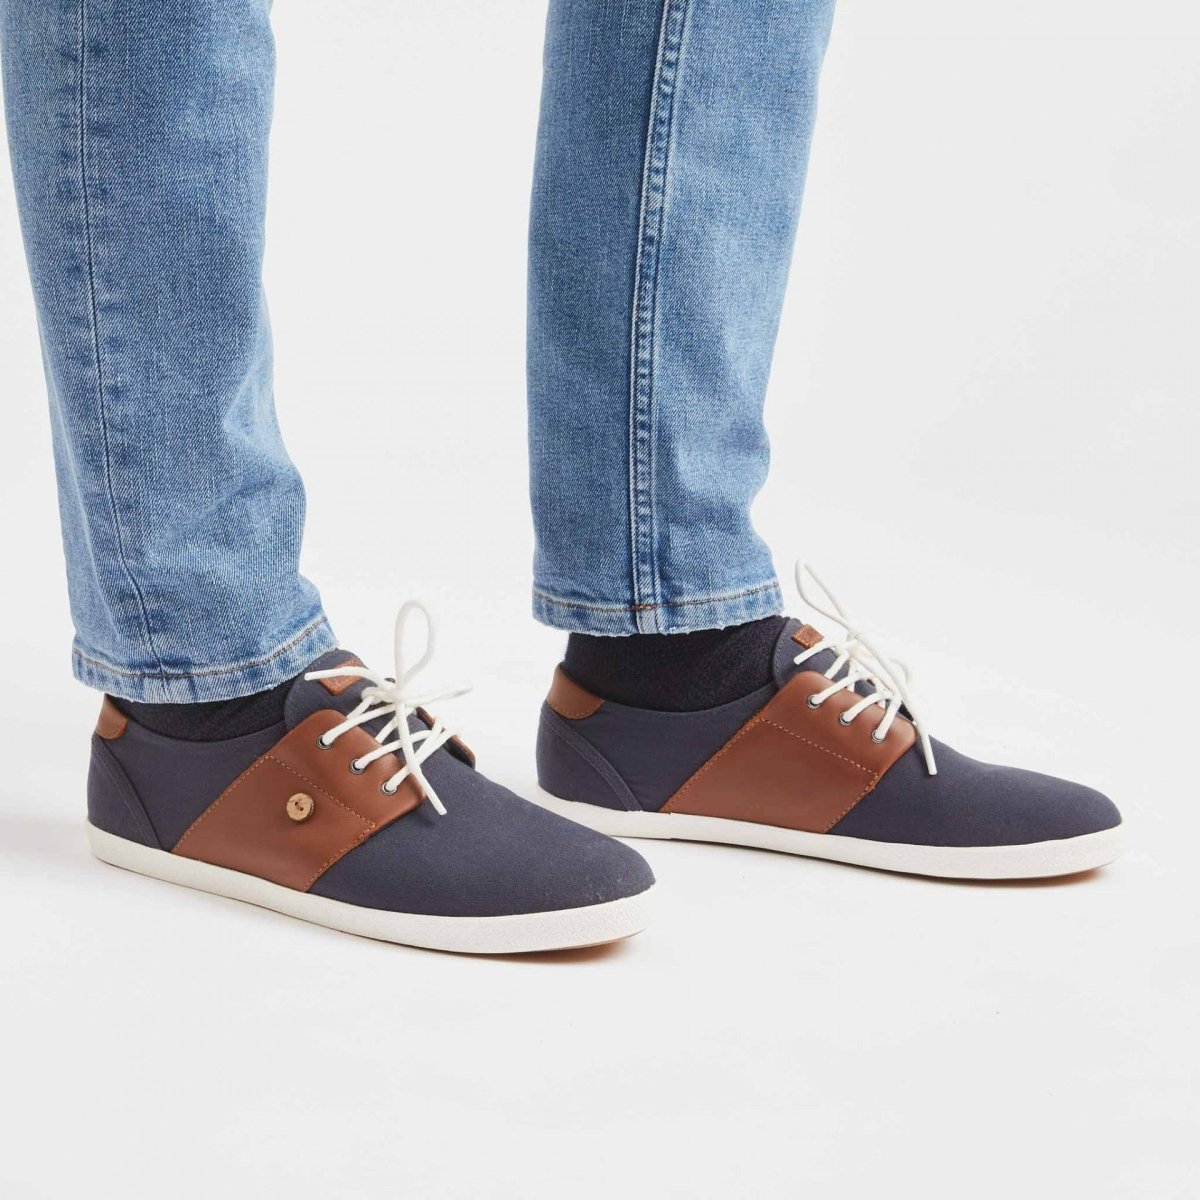 Cypress - Navy and Tawny Cotton and Leather Trainer - Good Chic